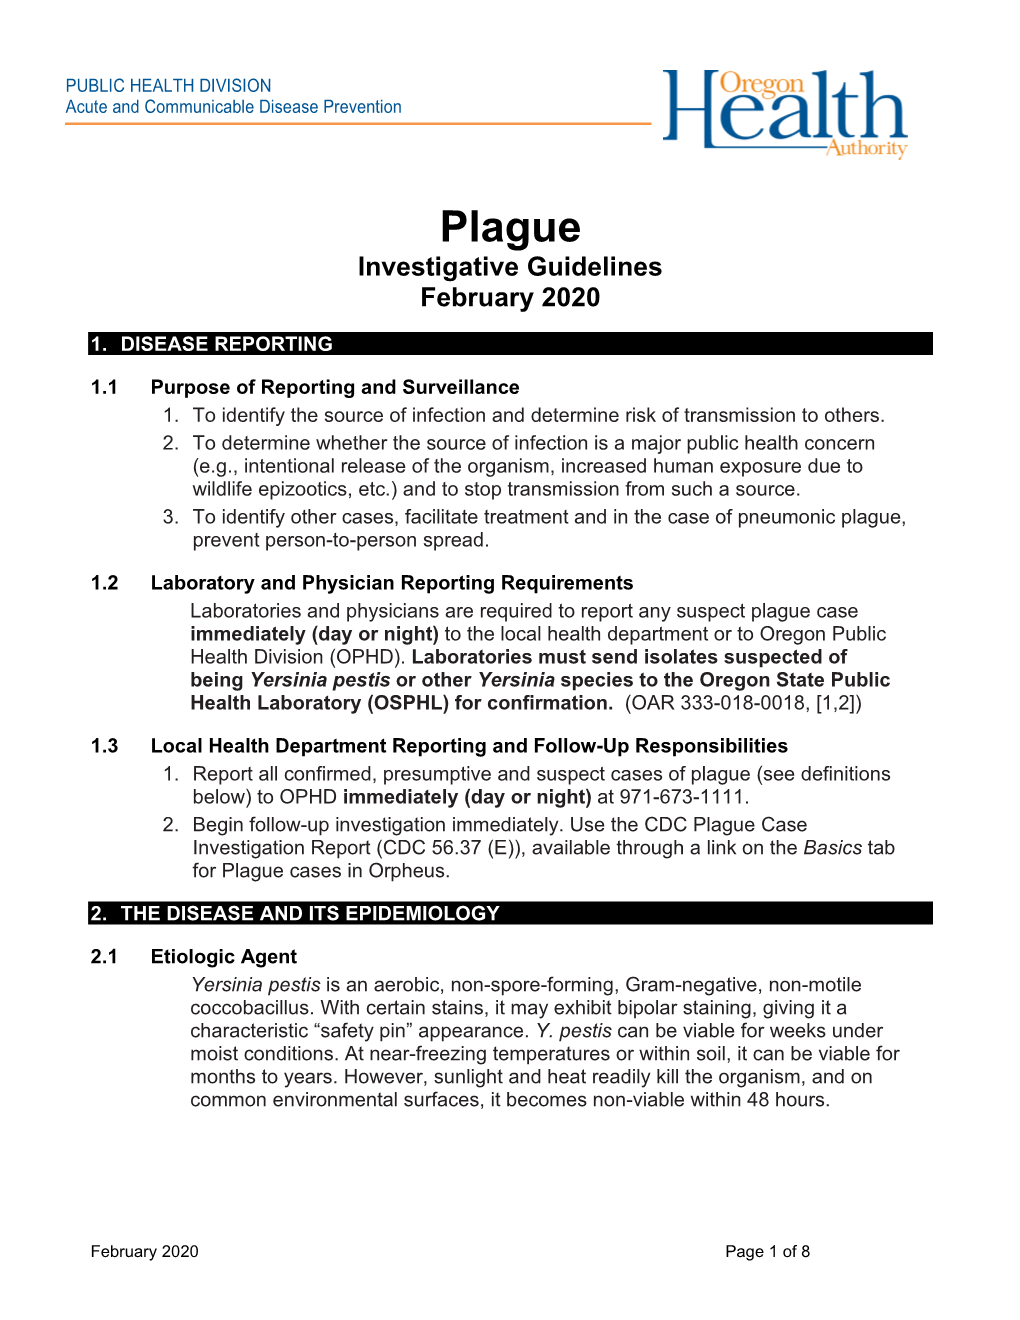 Plague Investigative Guidelines February 2020